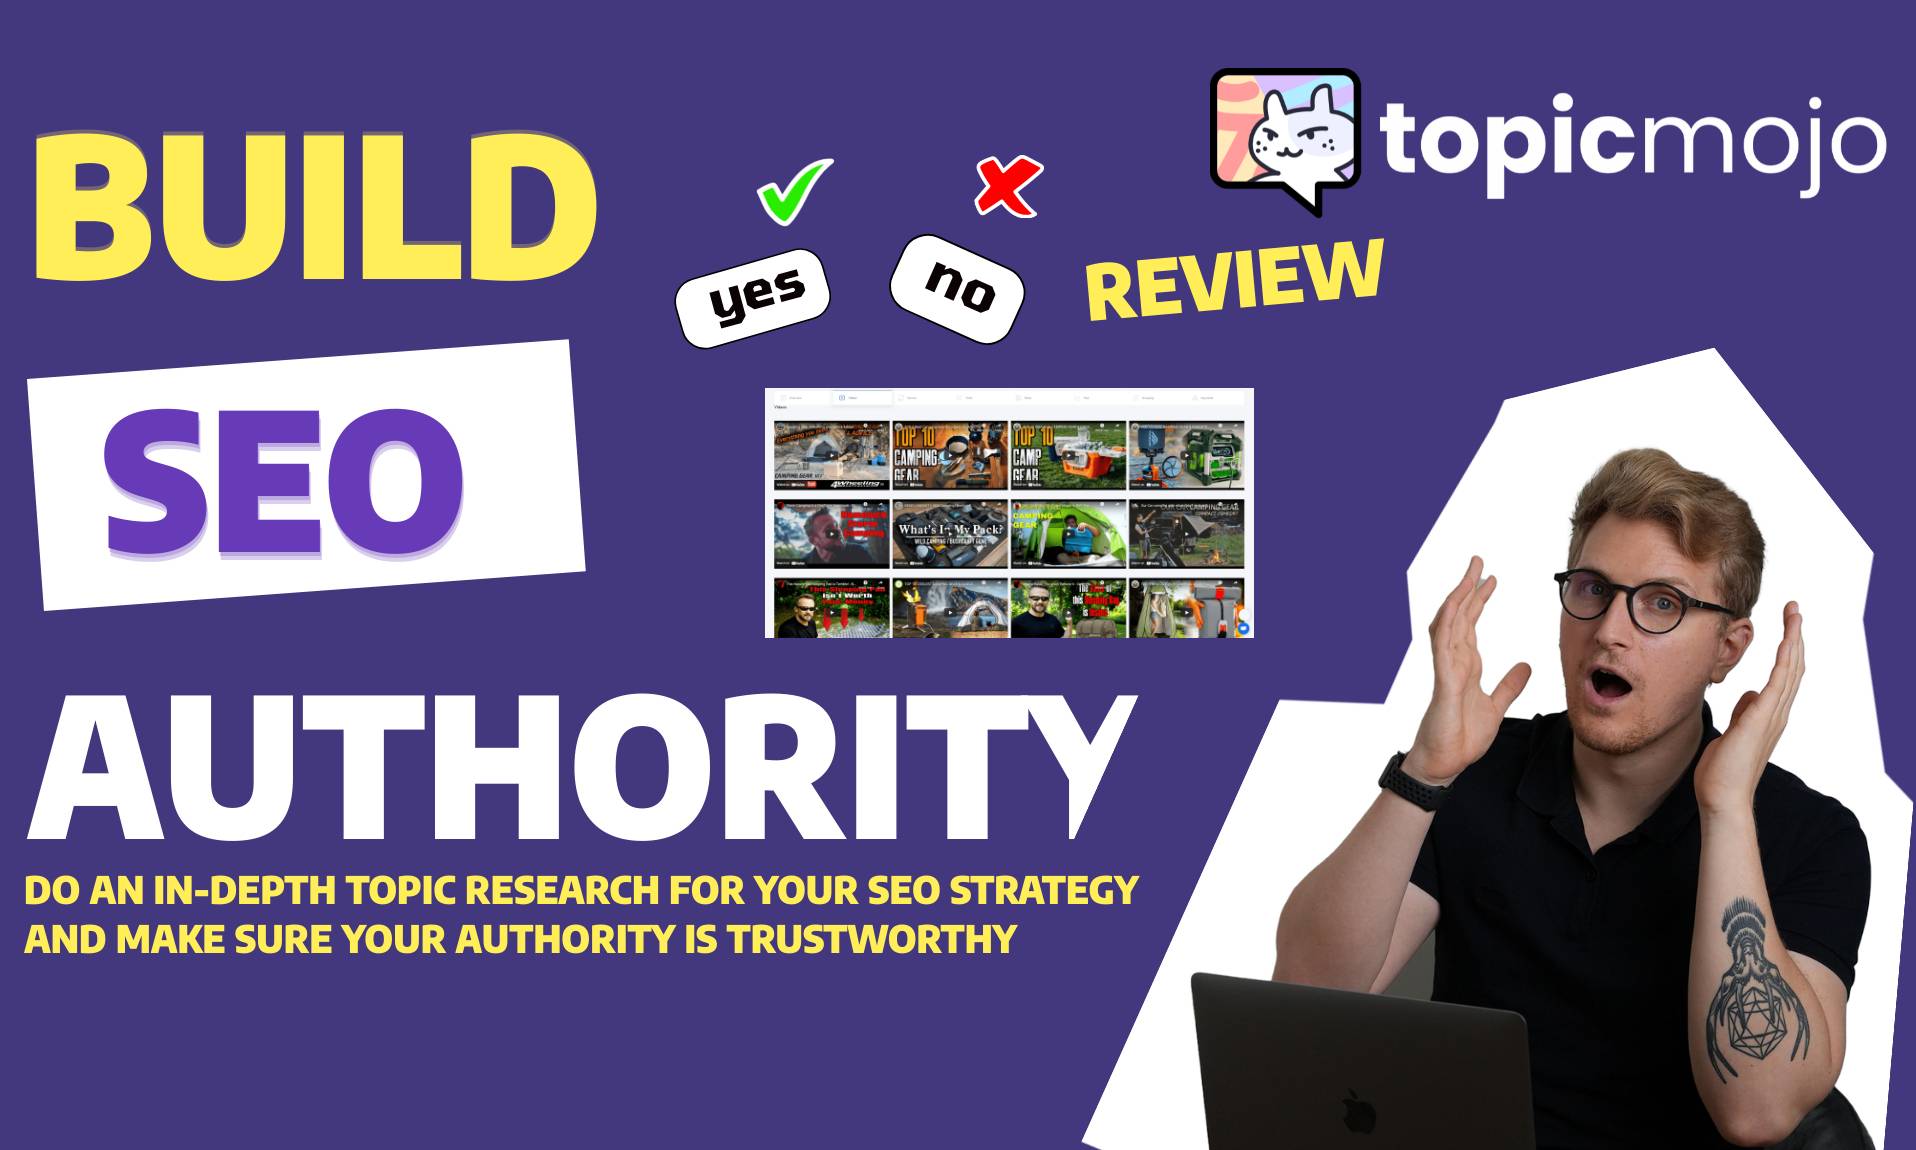 TopicMojo Review - Build Website SEO Authority